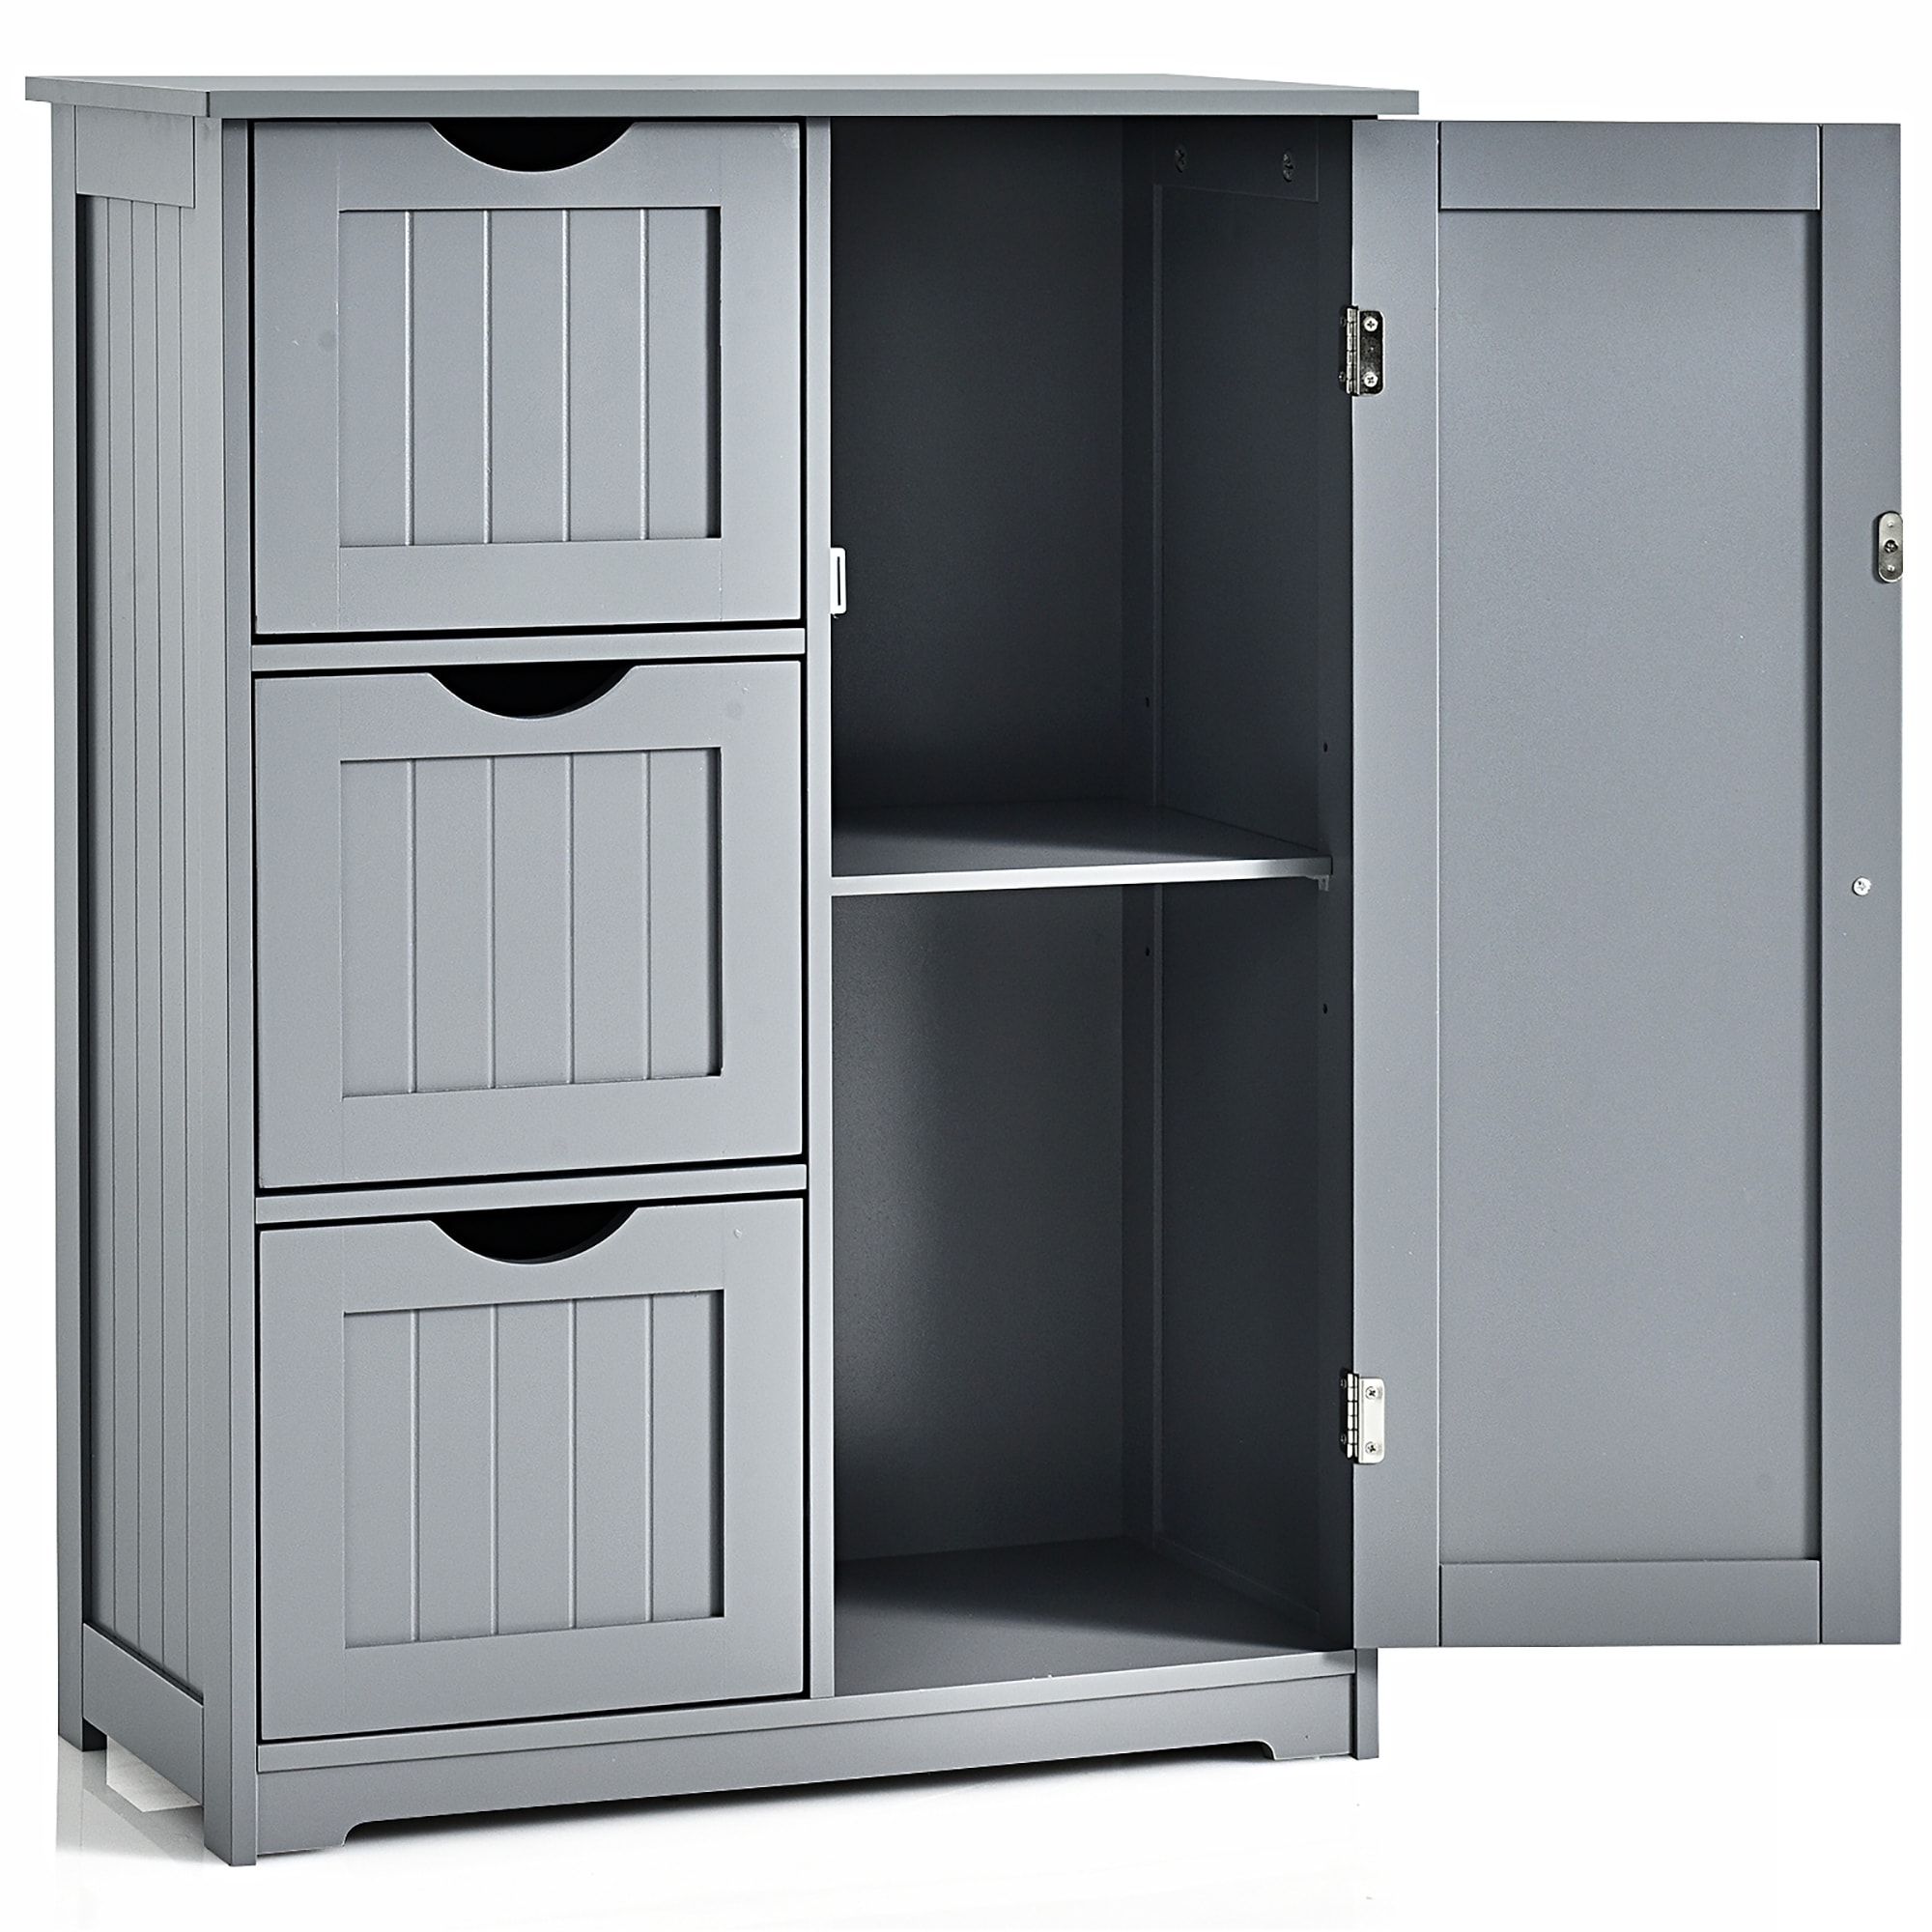 https://ak1.ostkcdn.com/images/products/is/images/direct/010d81f52c93be96f602d0a012e2443836870d97/Costway-Bathroom-Floor-Cabinet-Side-Storage-Cabinet-with-3-Drawers-and.jpg